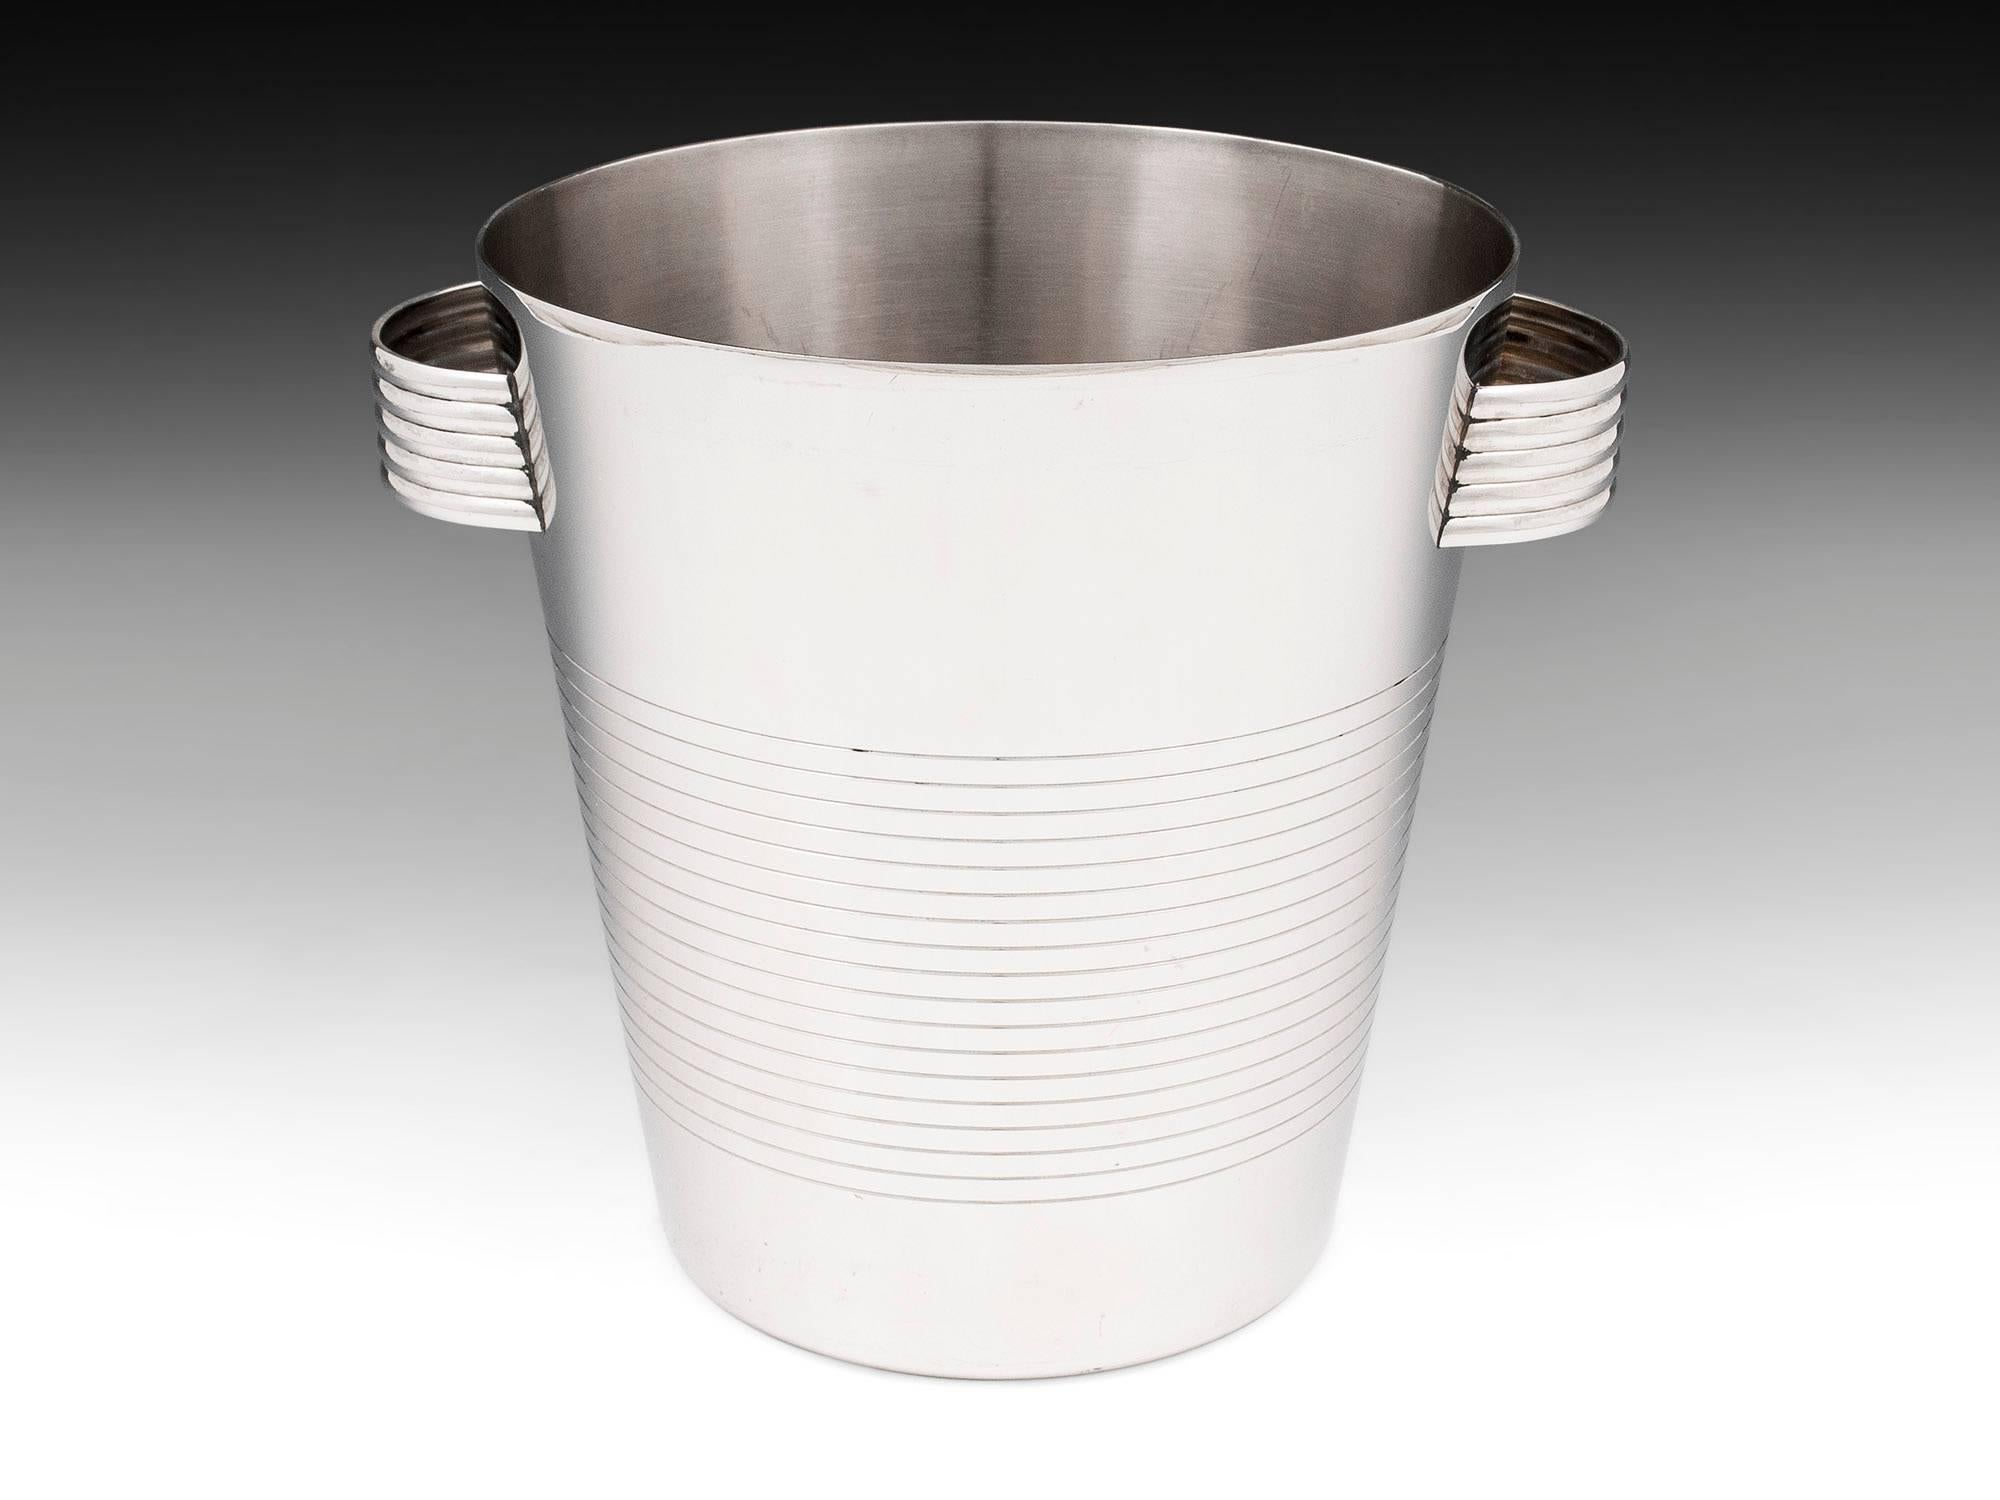 Vintage stainless steel champagne bucket with engraved striping around the body and ribbed handles. Very stylish ice bucket by Inox of France.